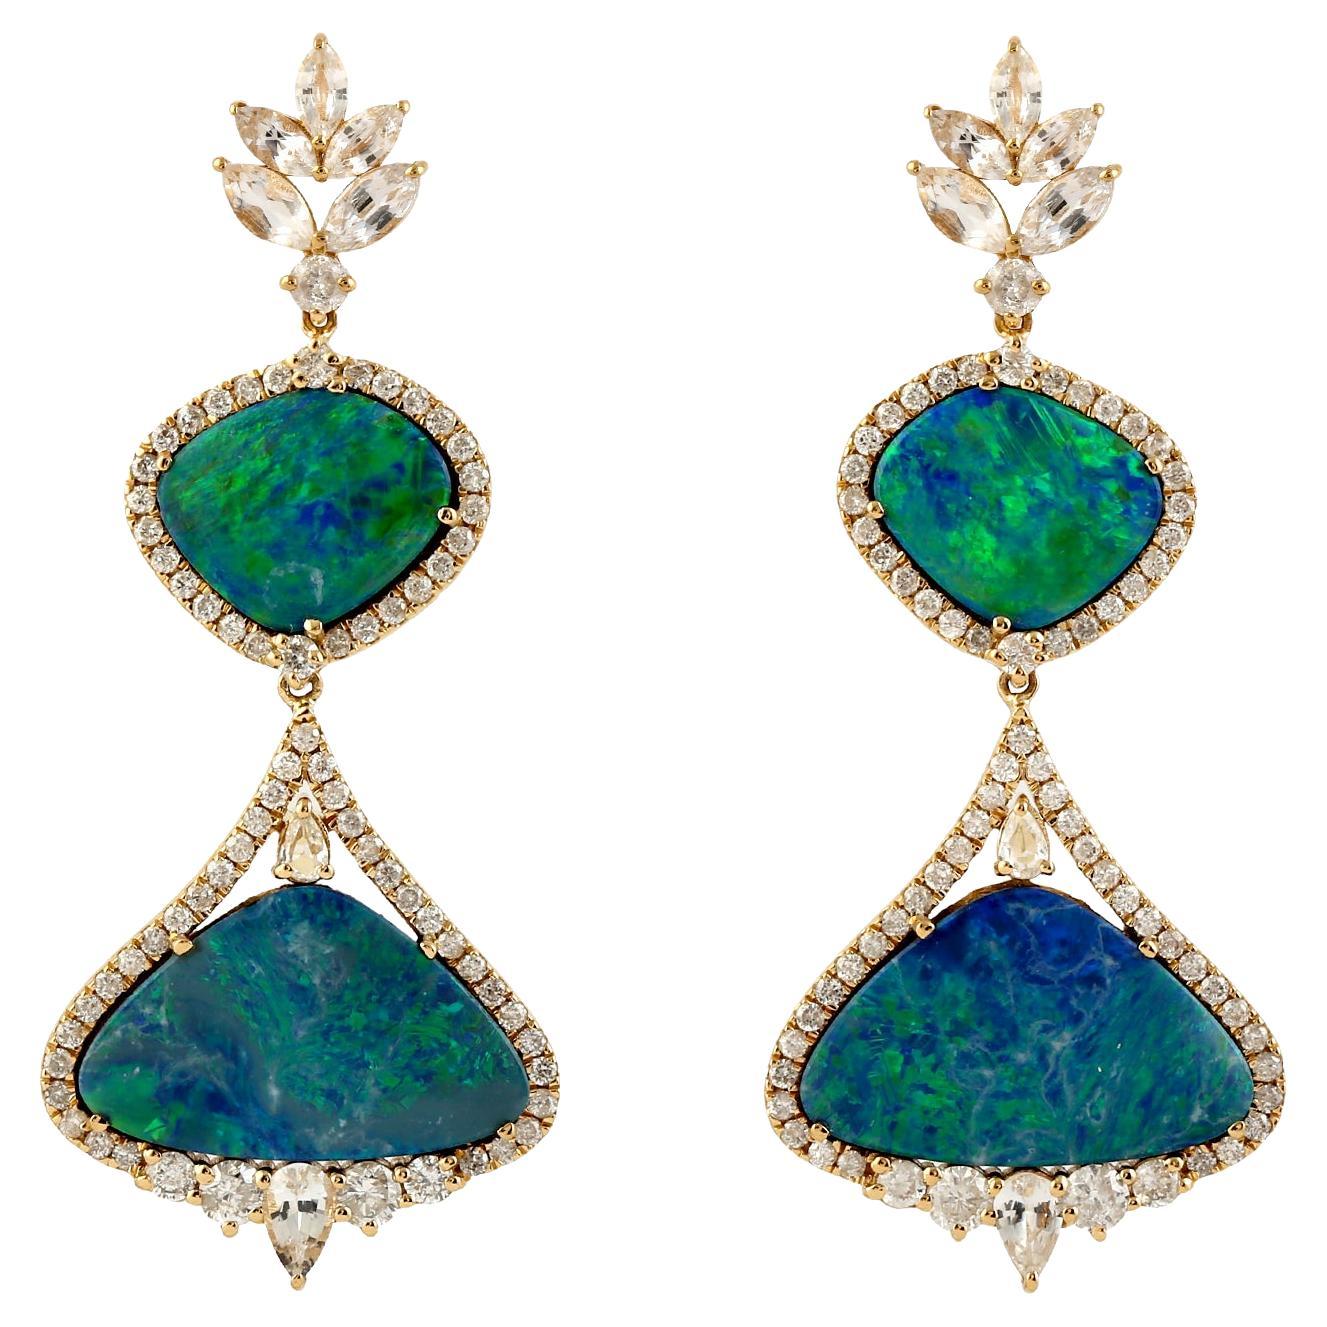 Sapphire & Opal Dangle Earring with Pave Diamond Made in 18k Gold